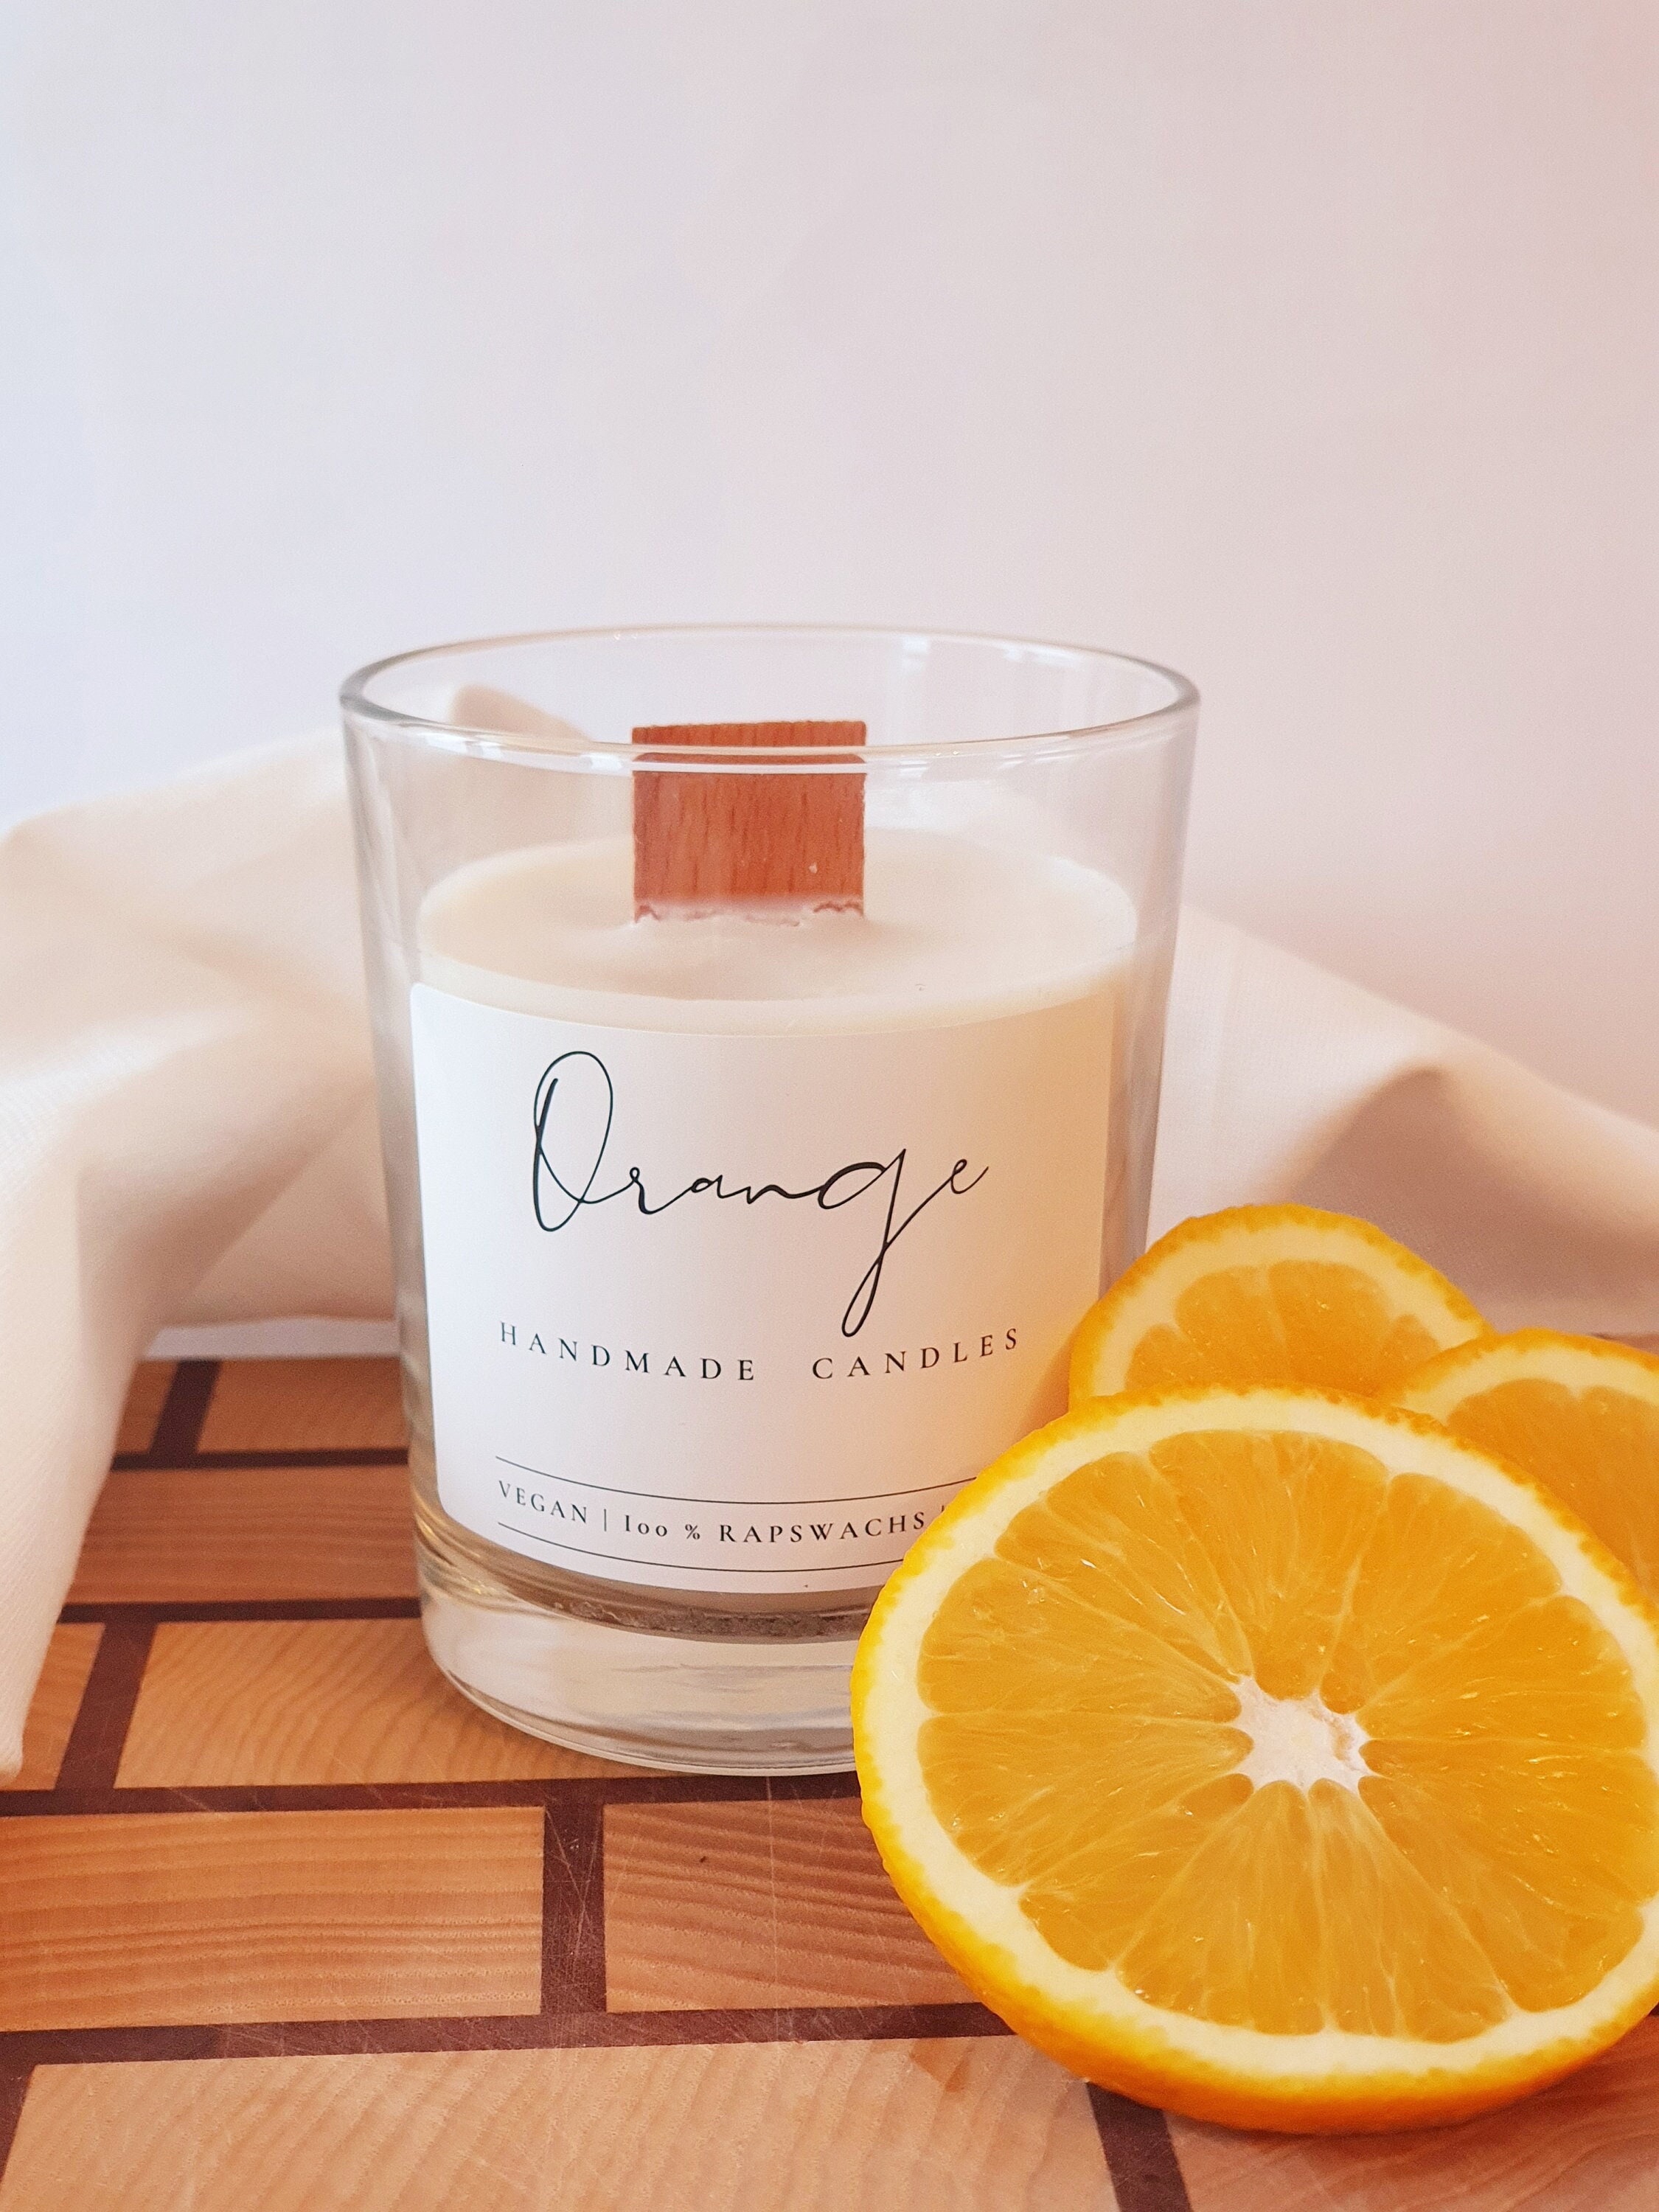 Handmade Soy Wax Candle Crackling Candle Gift for Her Orange Scent Wooden Wick Soy Wax Candle Crackling Candle